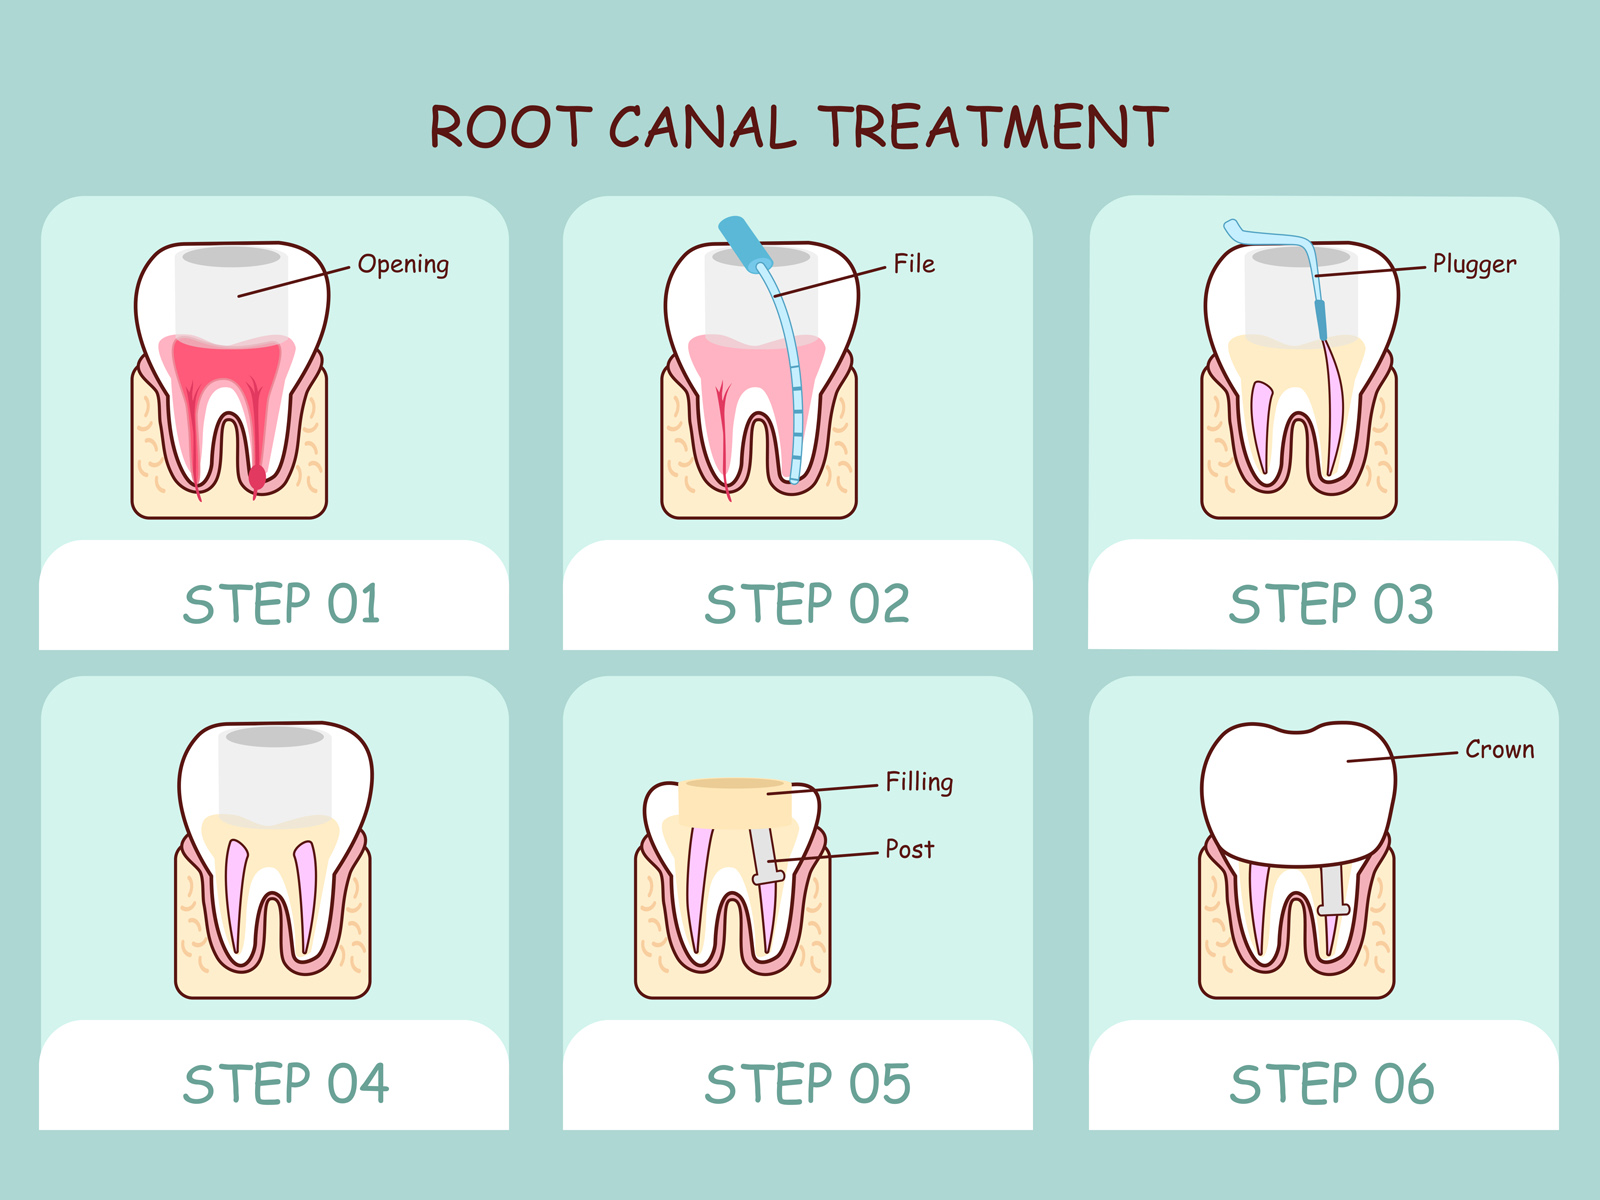 How does a tooth feel after root canal?